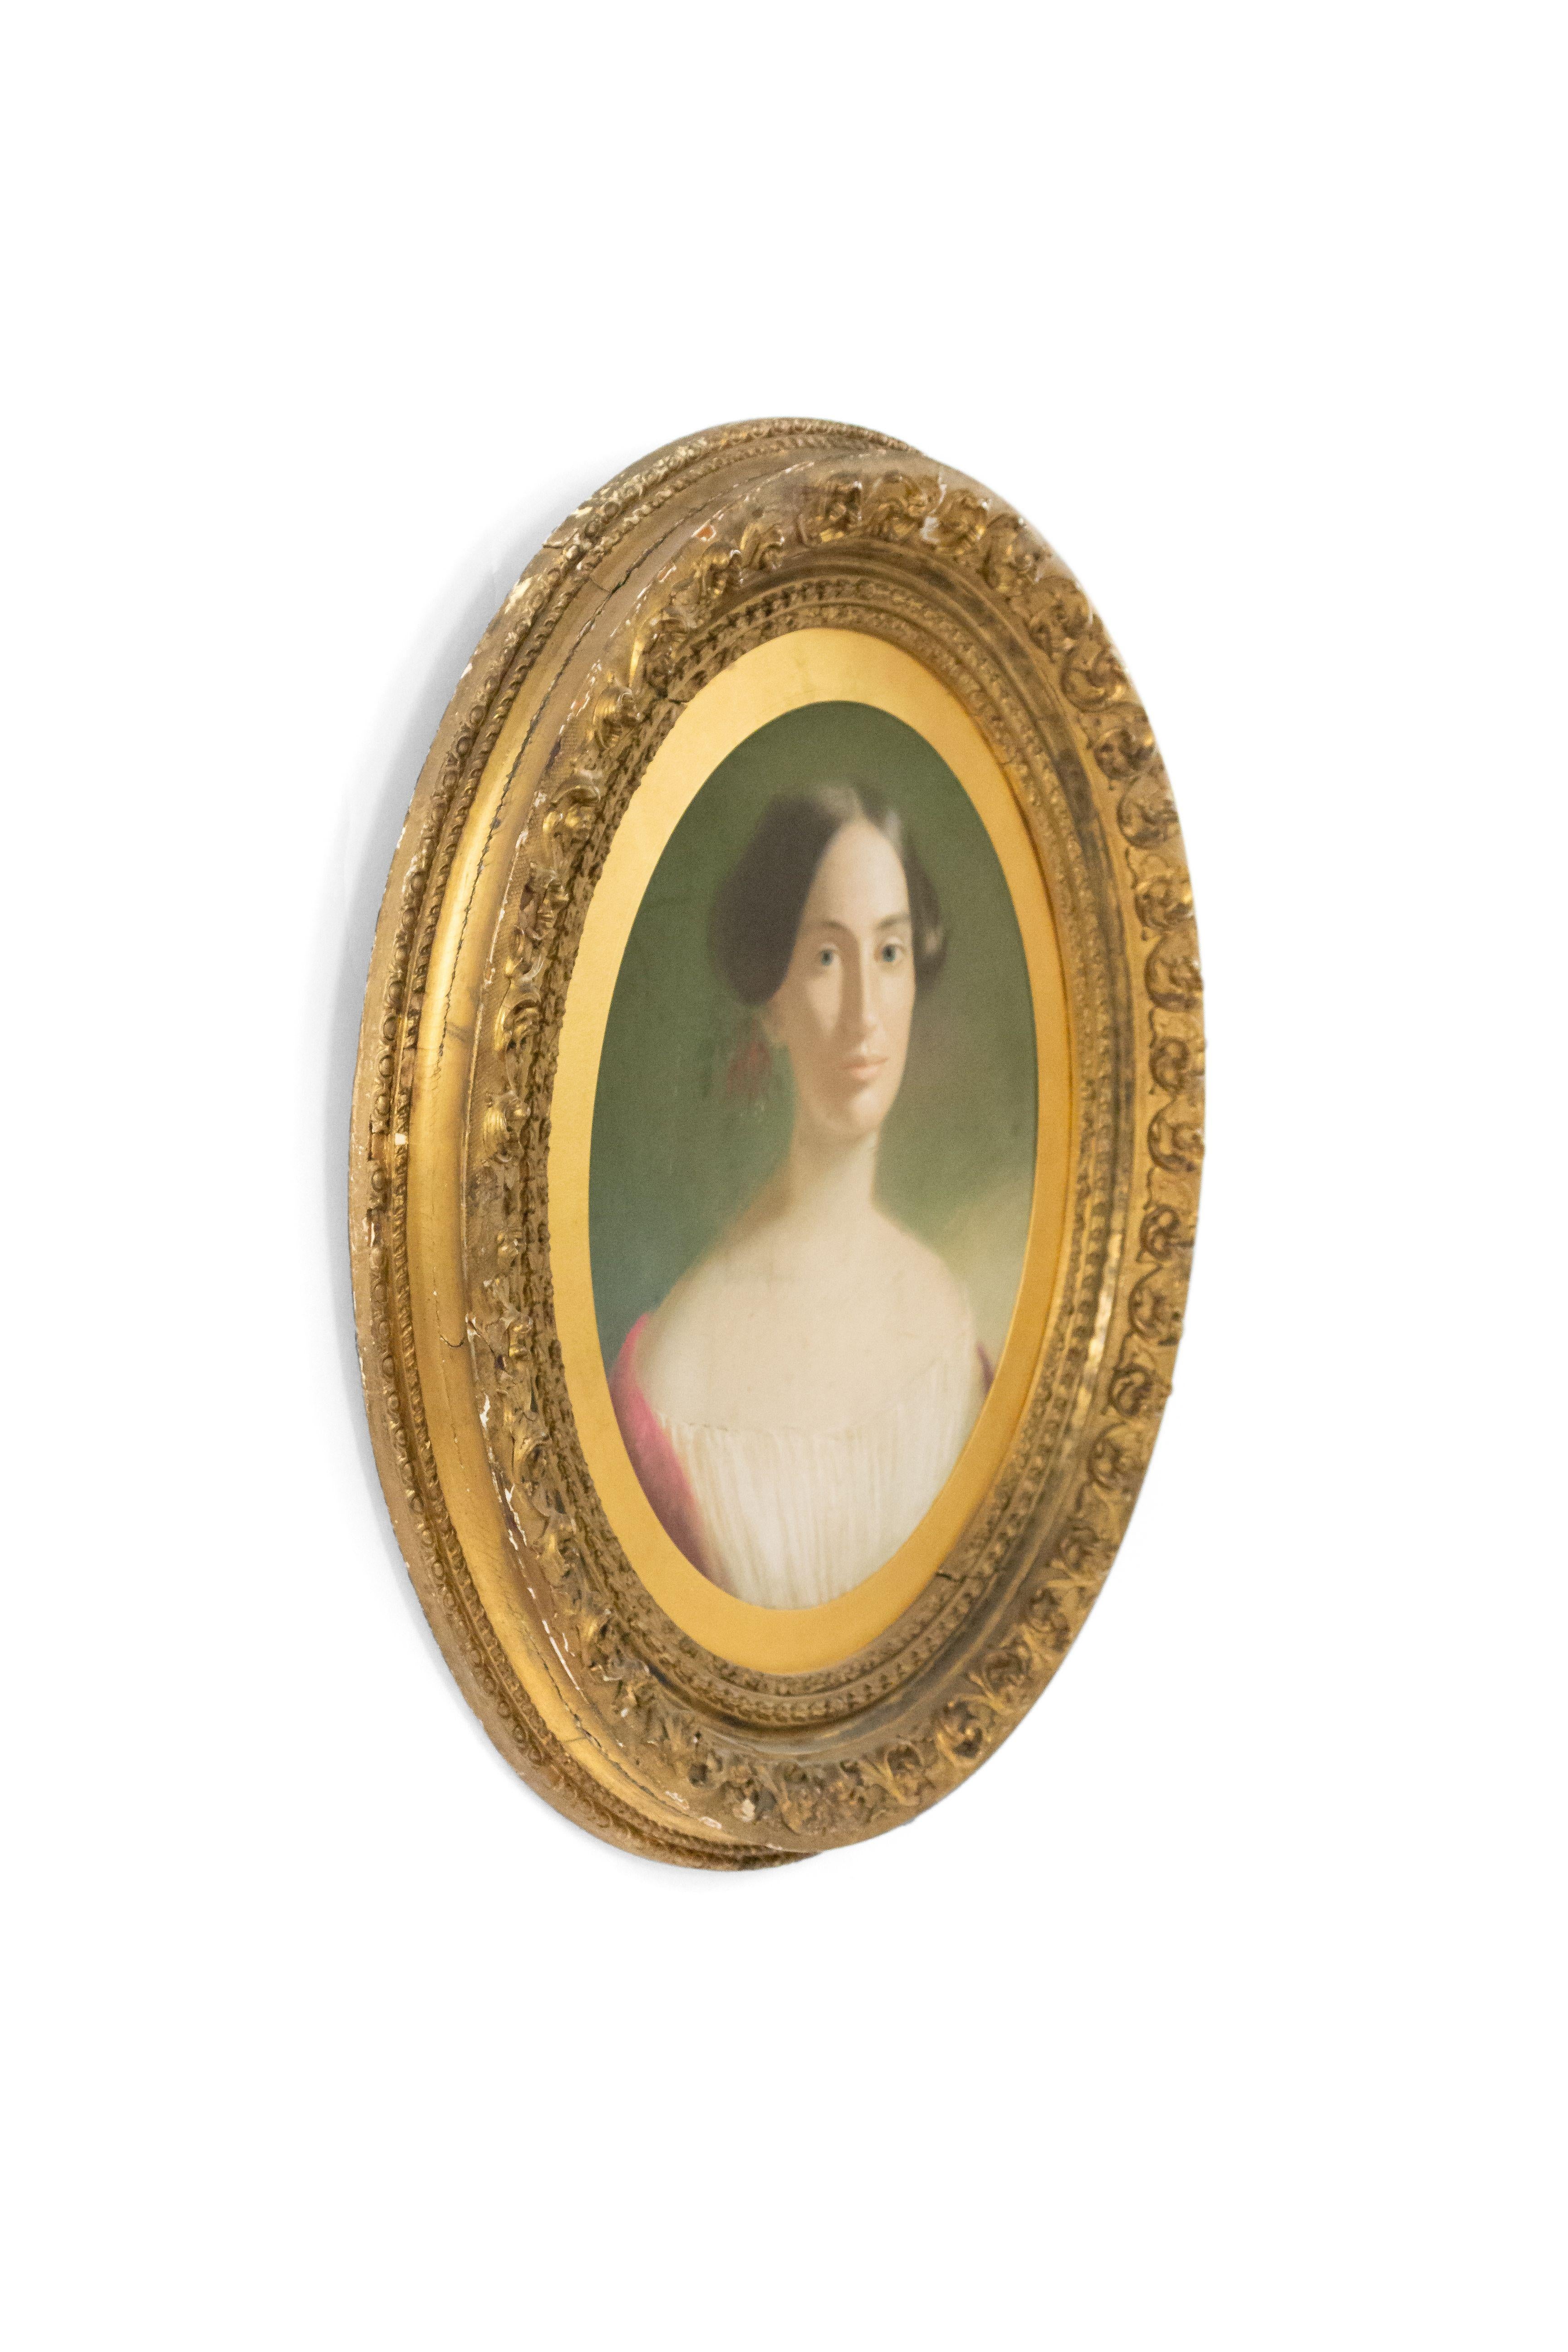 19th Century American Victorian Lady Pastel Portrait in an Oval Frame For Sale 1